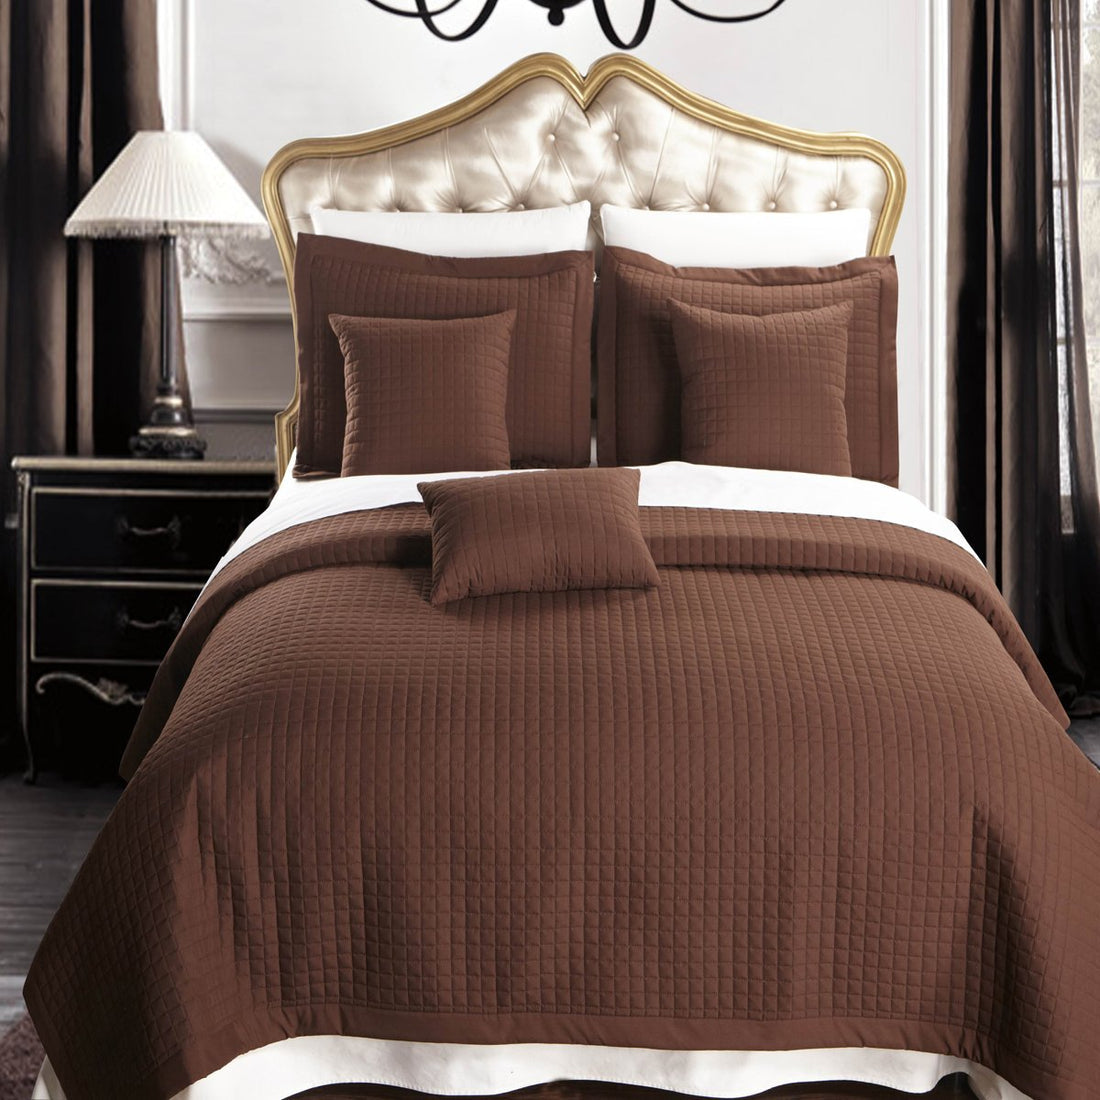 luxury checkered quilted wrinkle-free 4-6 piece quilted coverlet chocolate